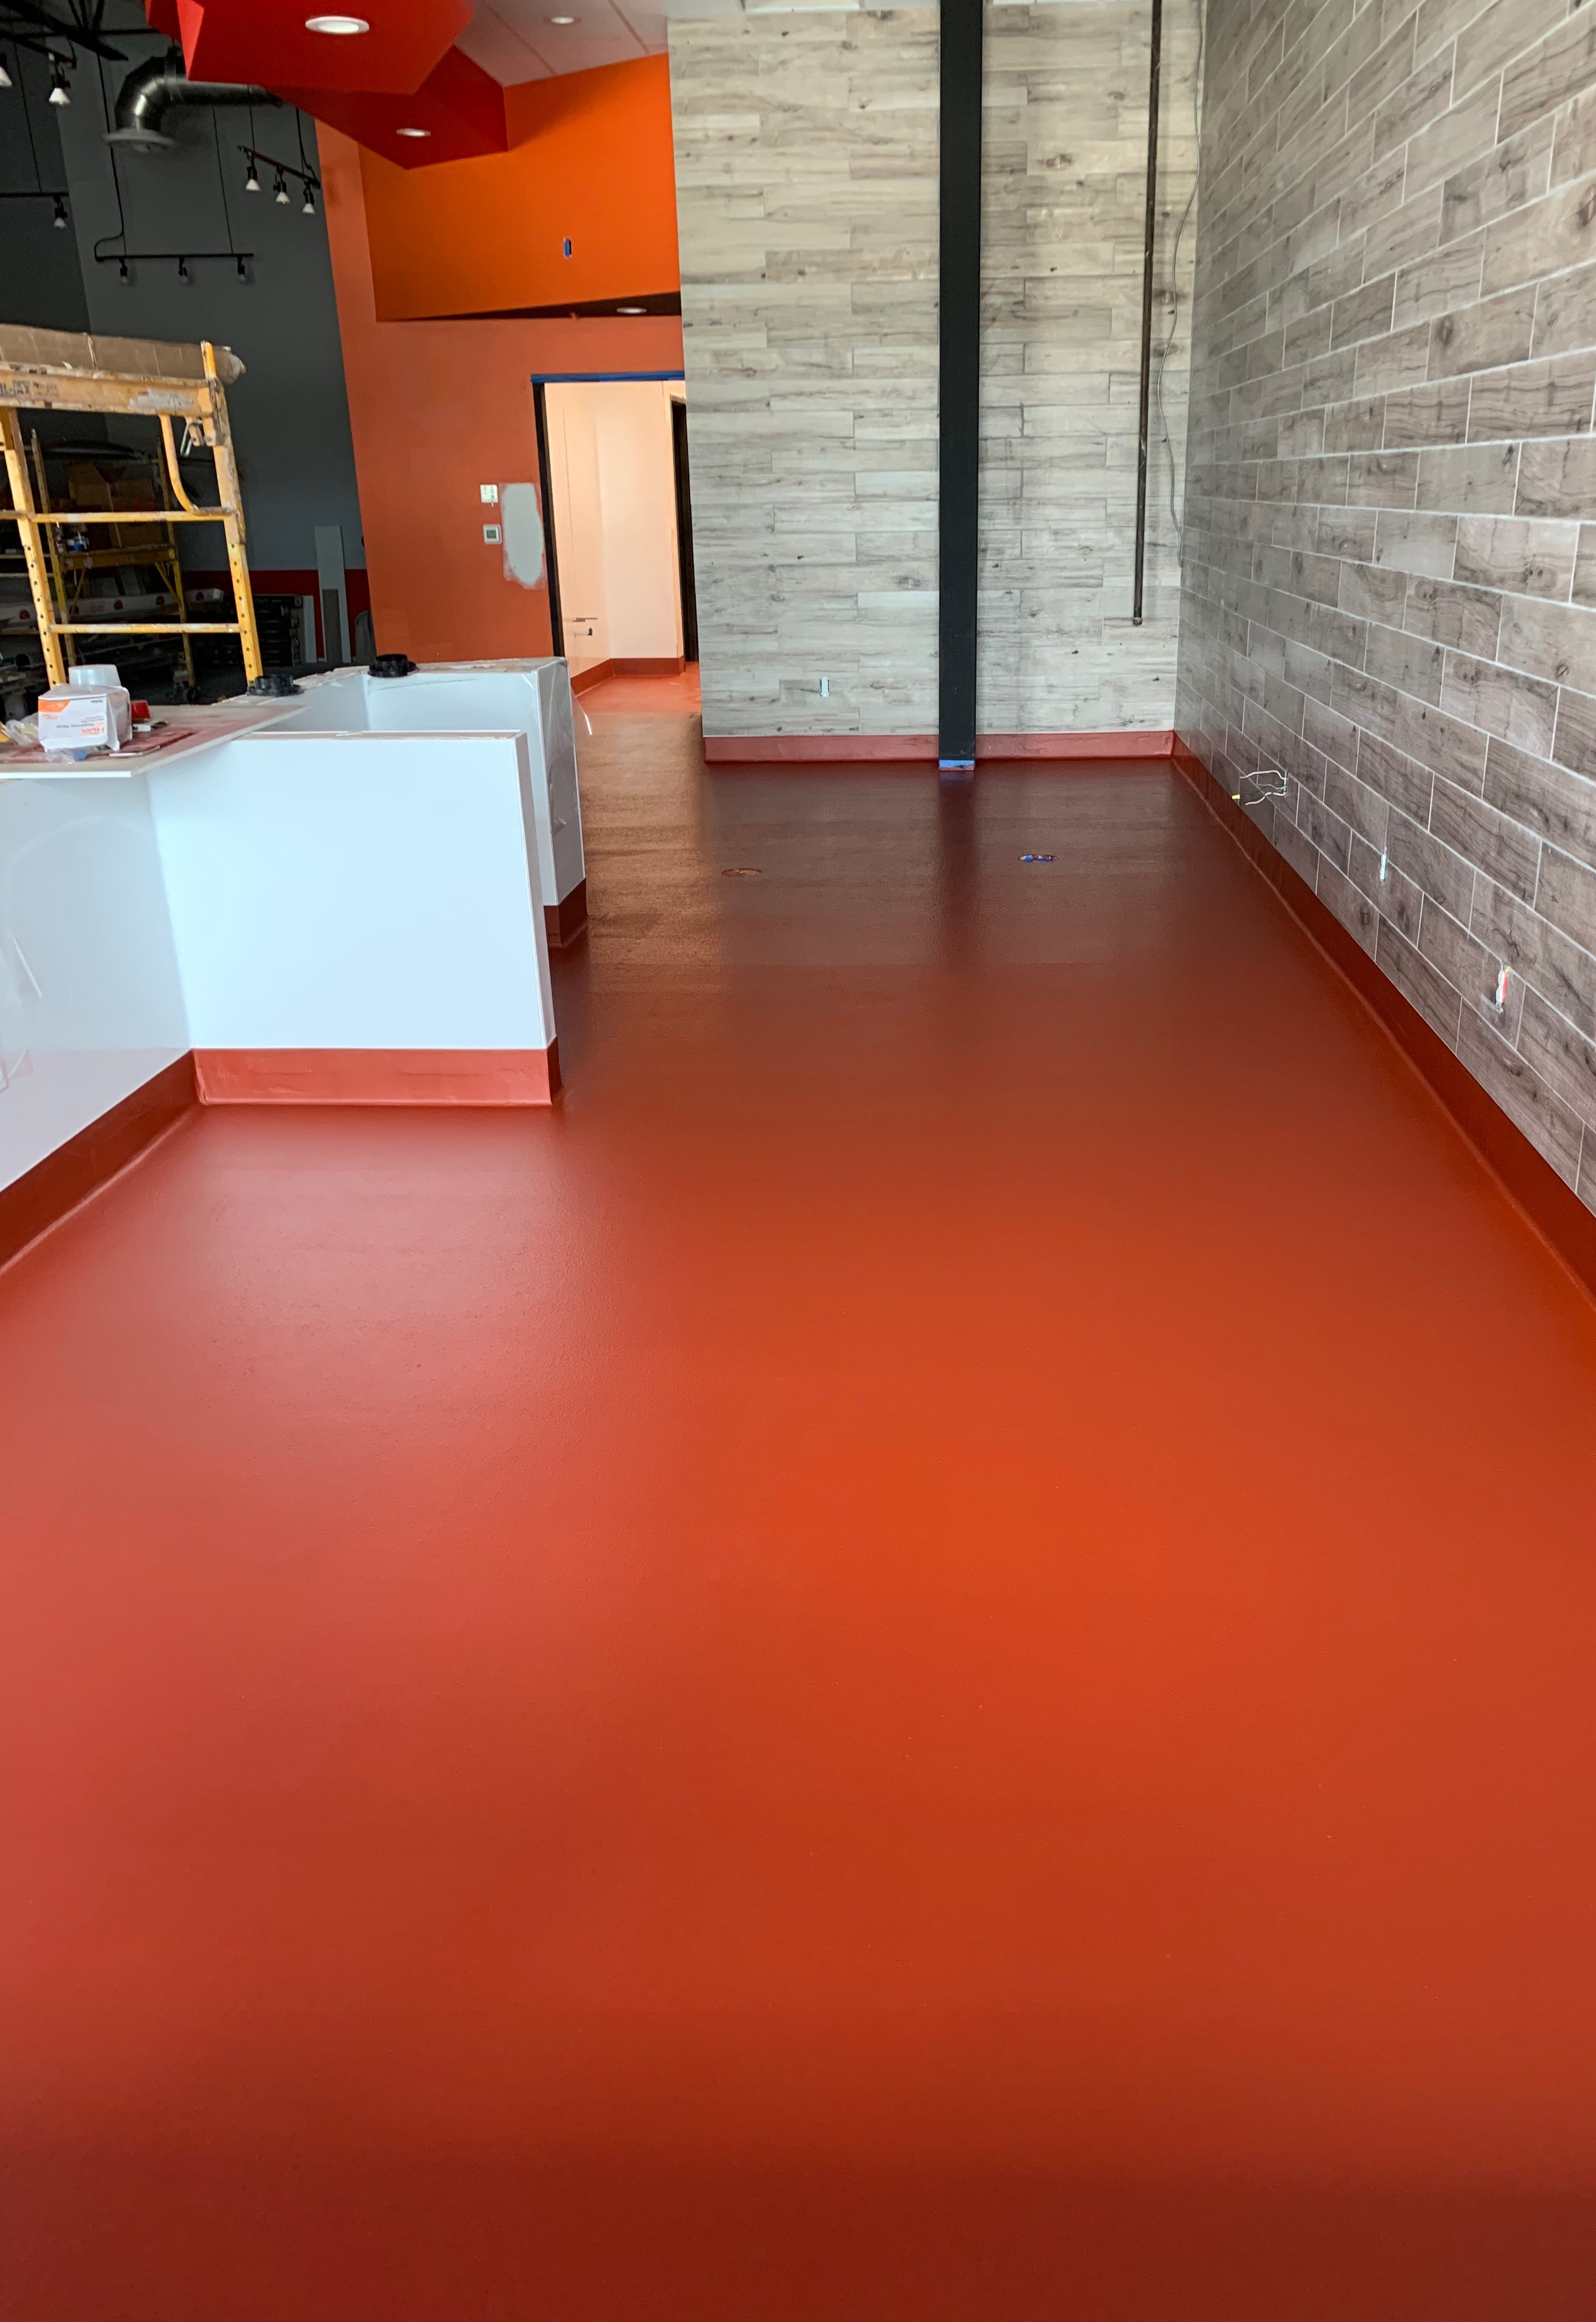 How Coatings for Concrete Floors can Help